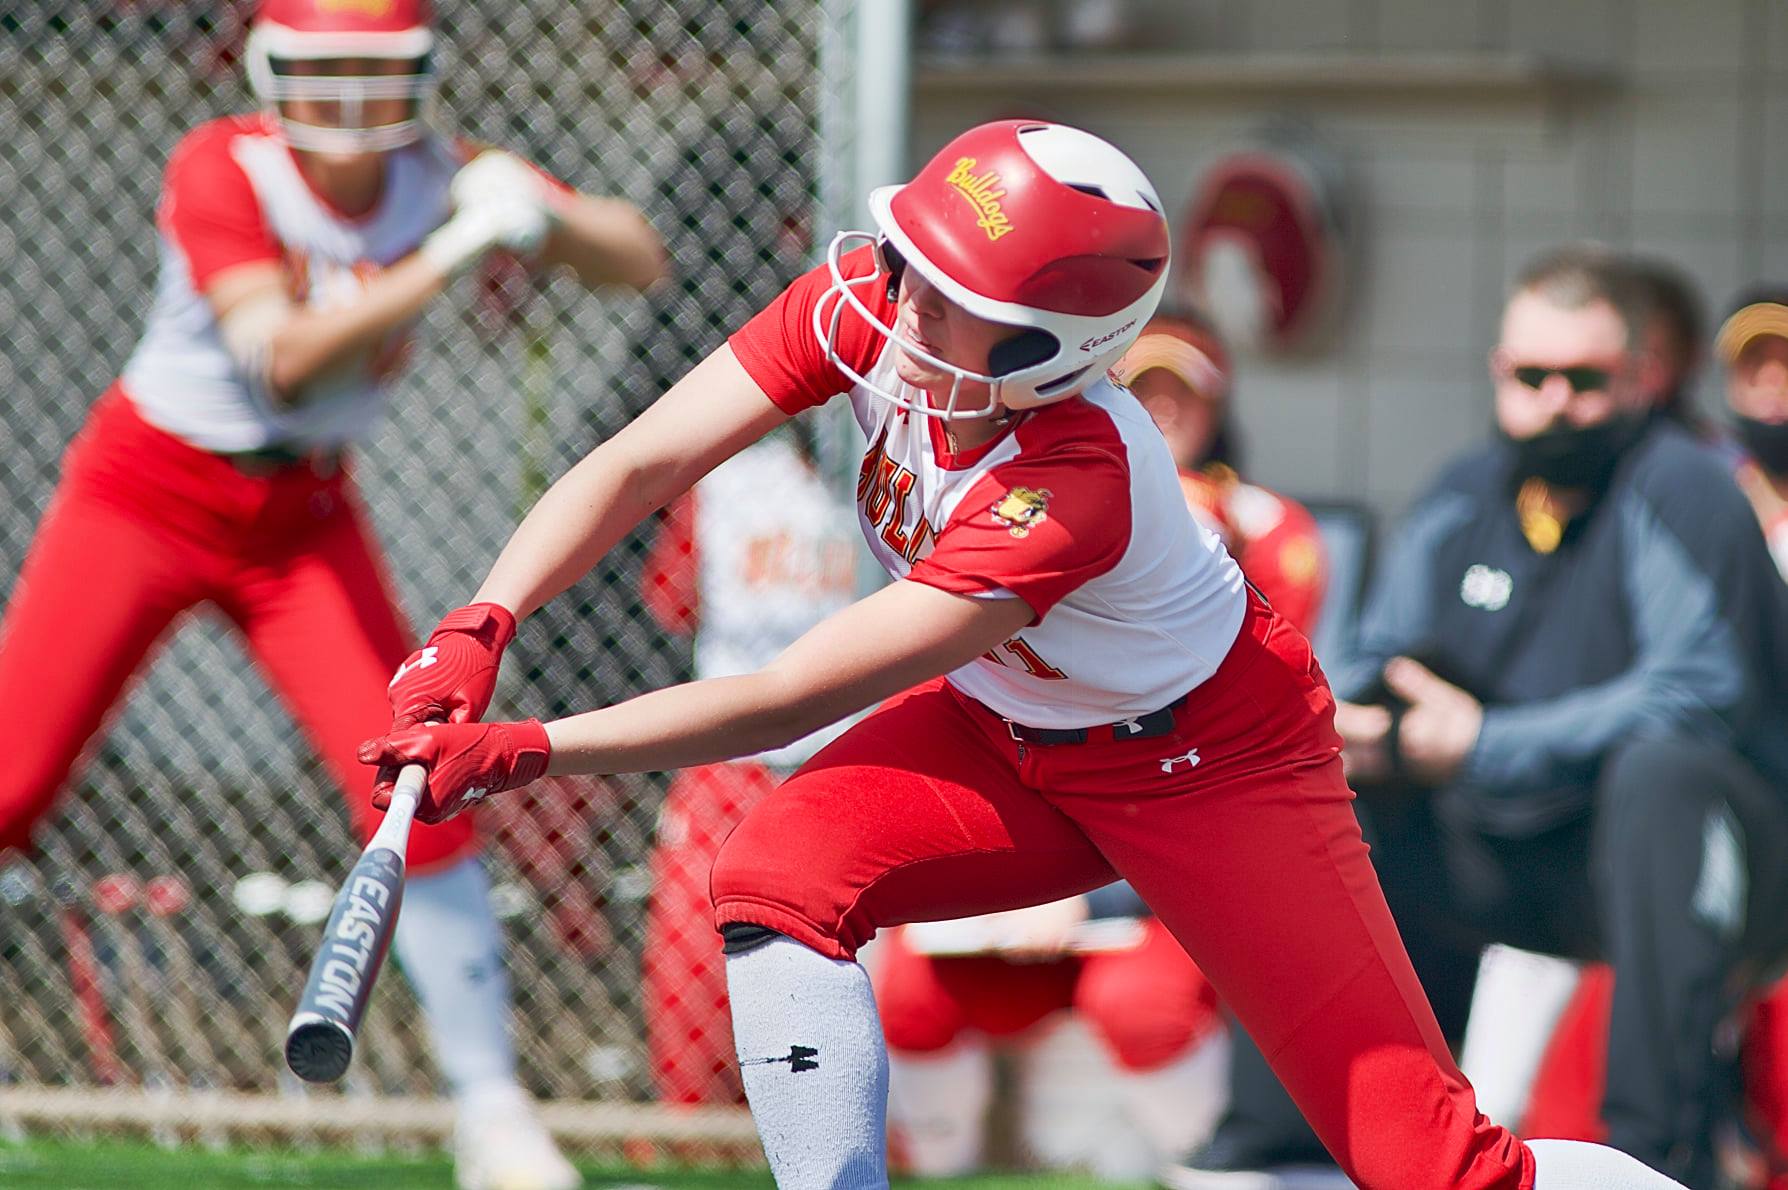 Ferris State Earns Big Win At Parkside Before Weather Impacts Nightcap